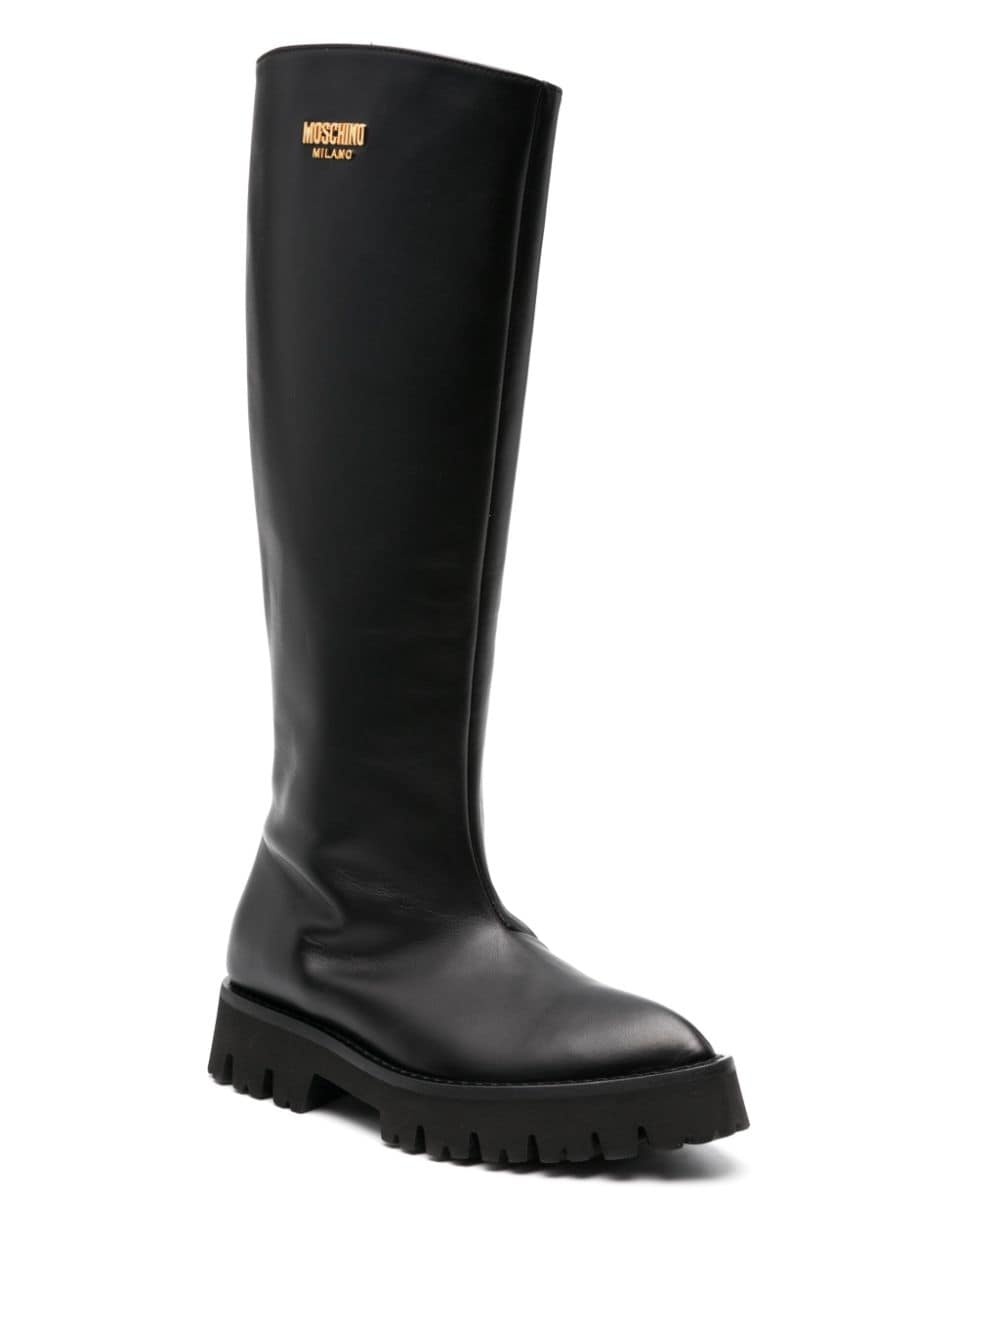 logo-plaque leather knee-high boots - 2